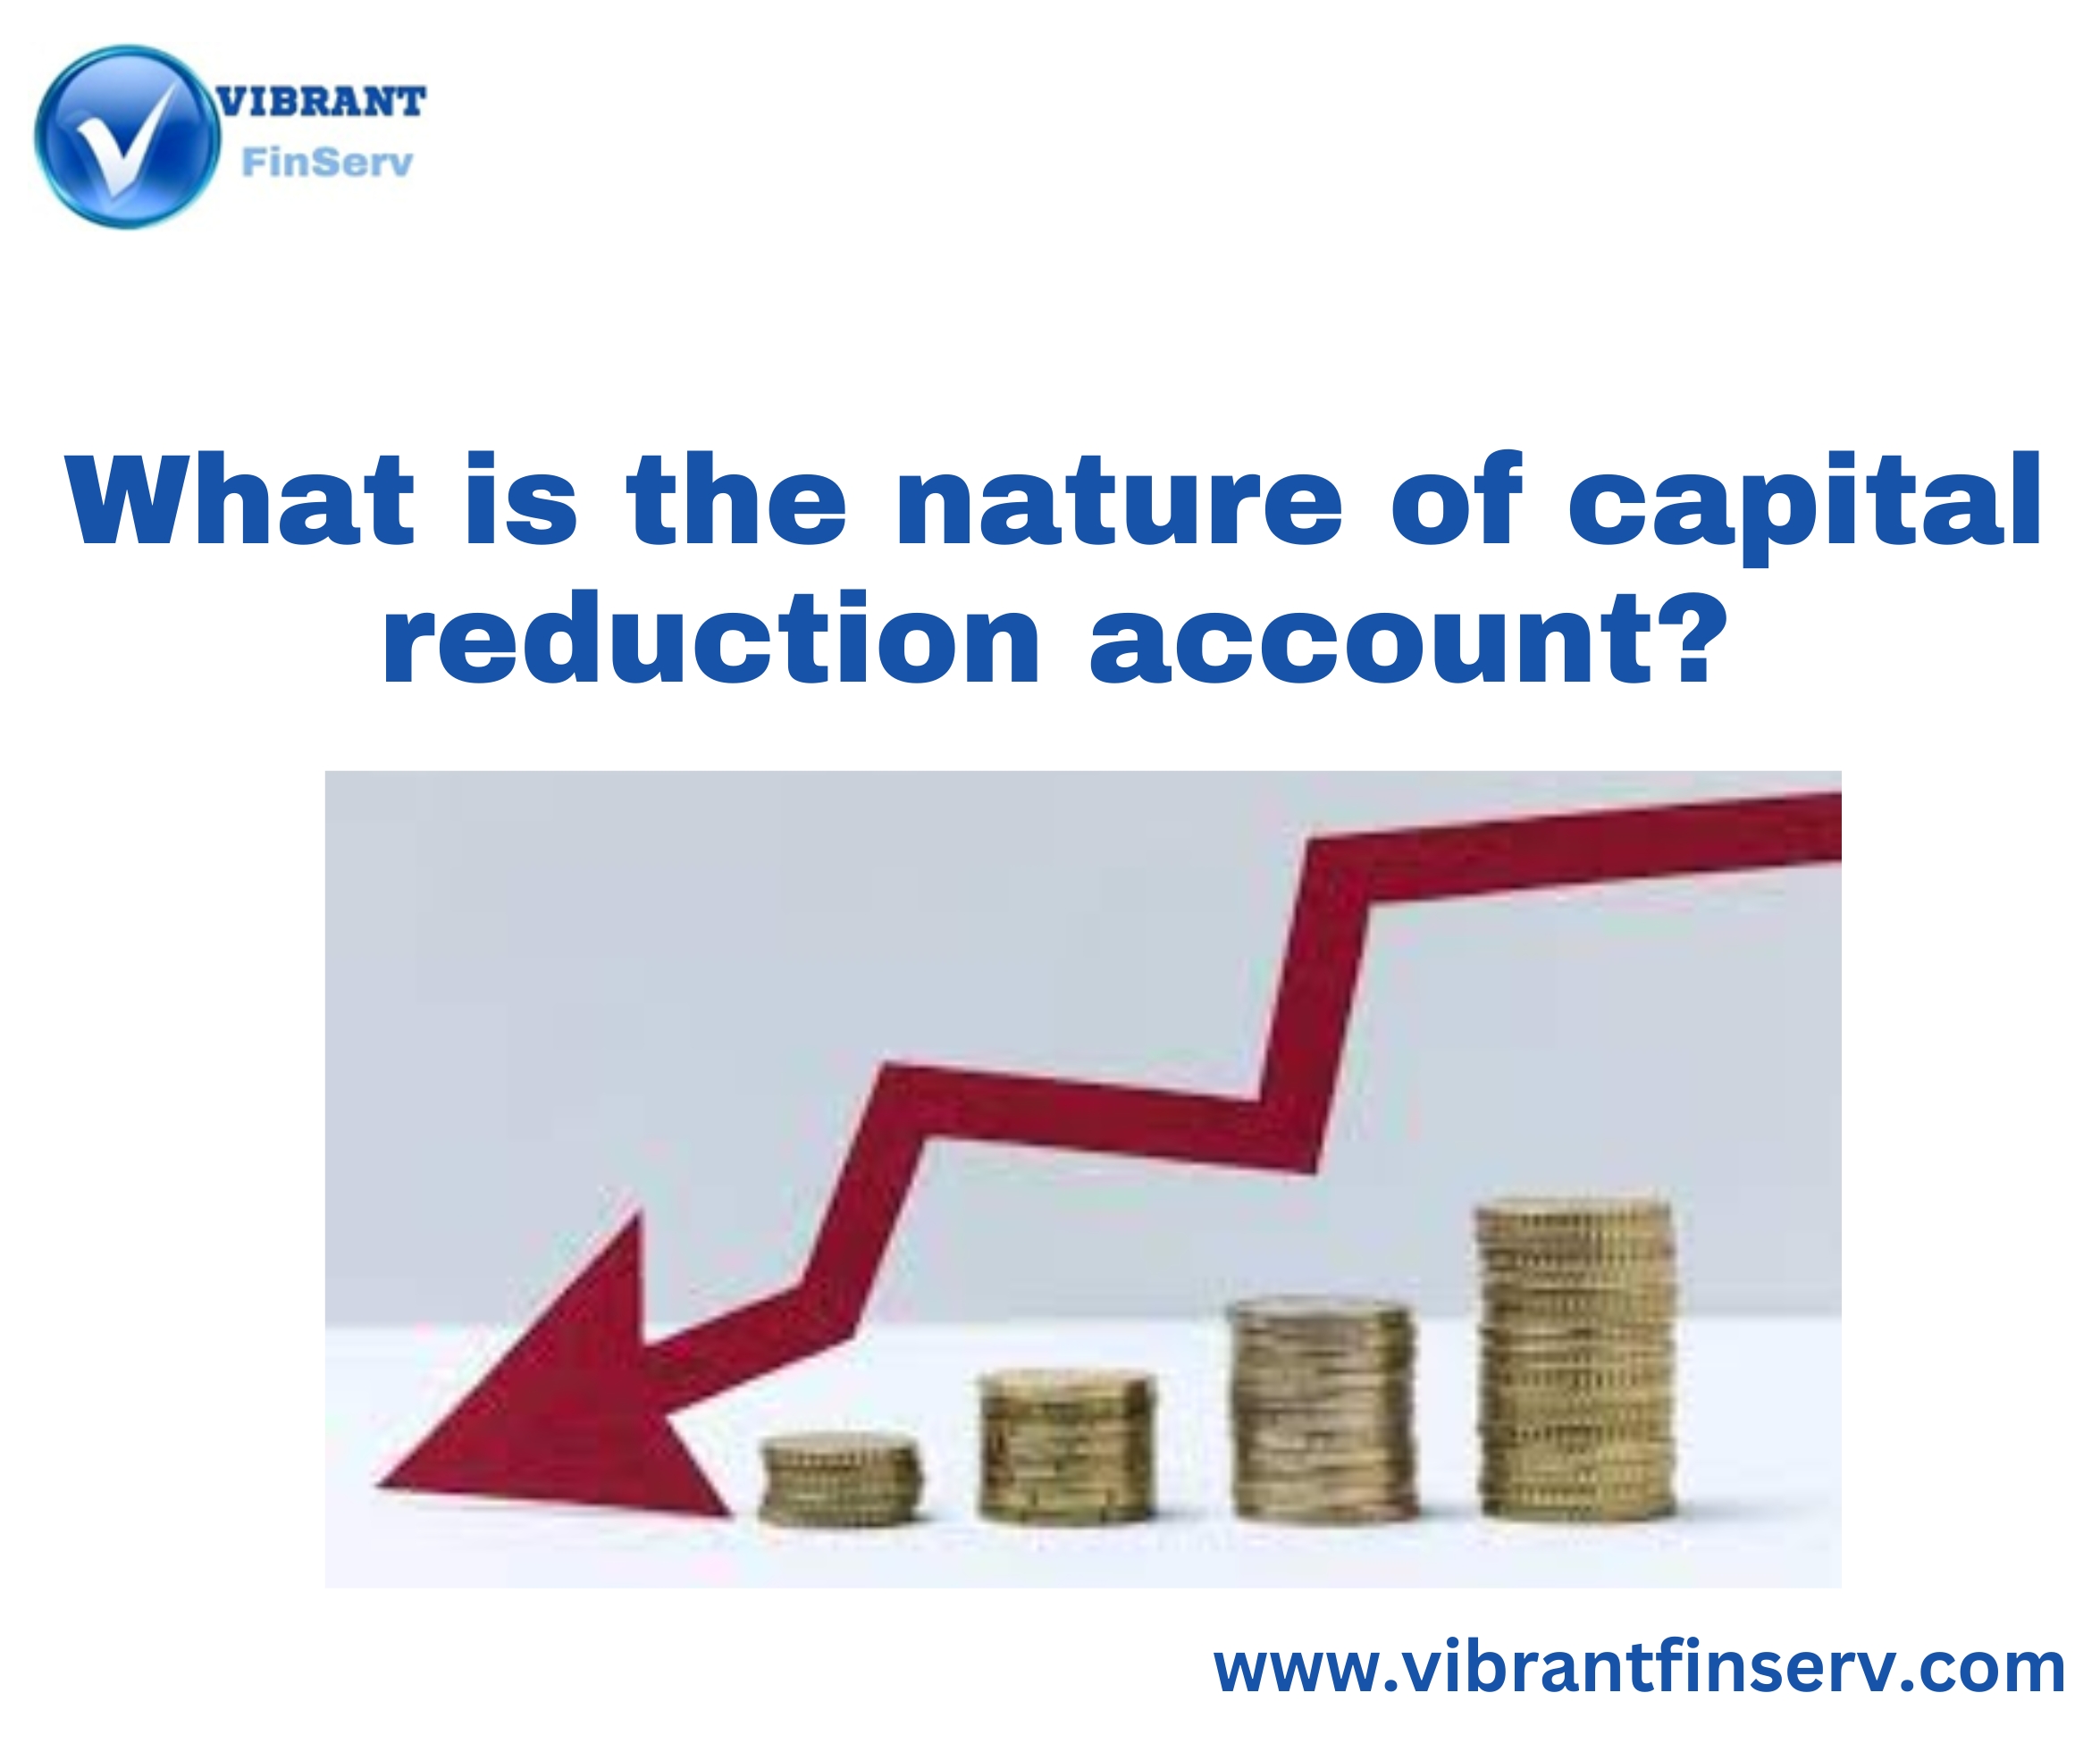 Nature of Capital Reduction Account